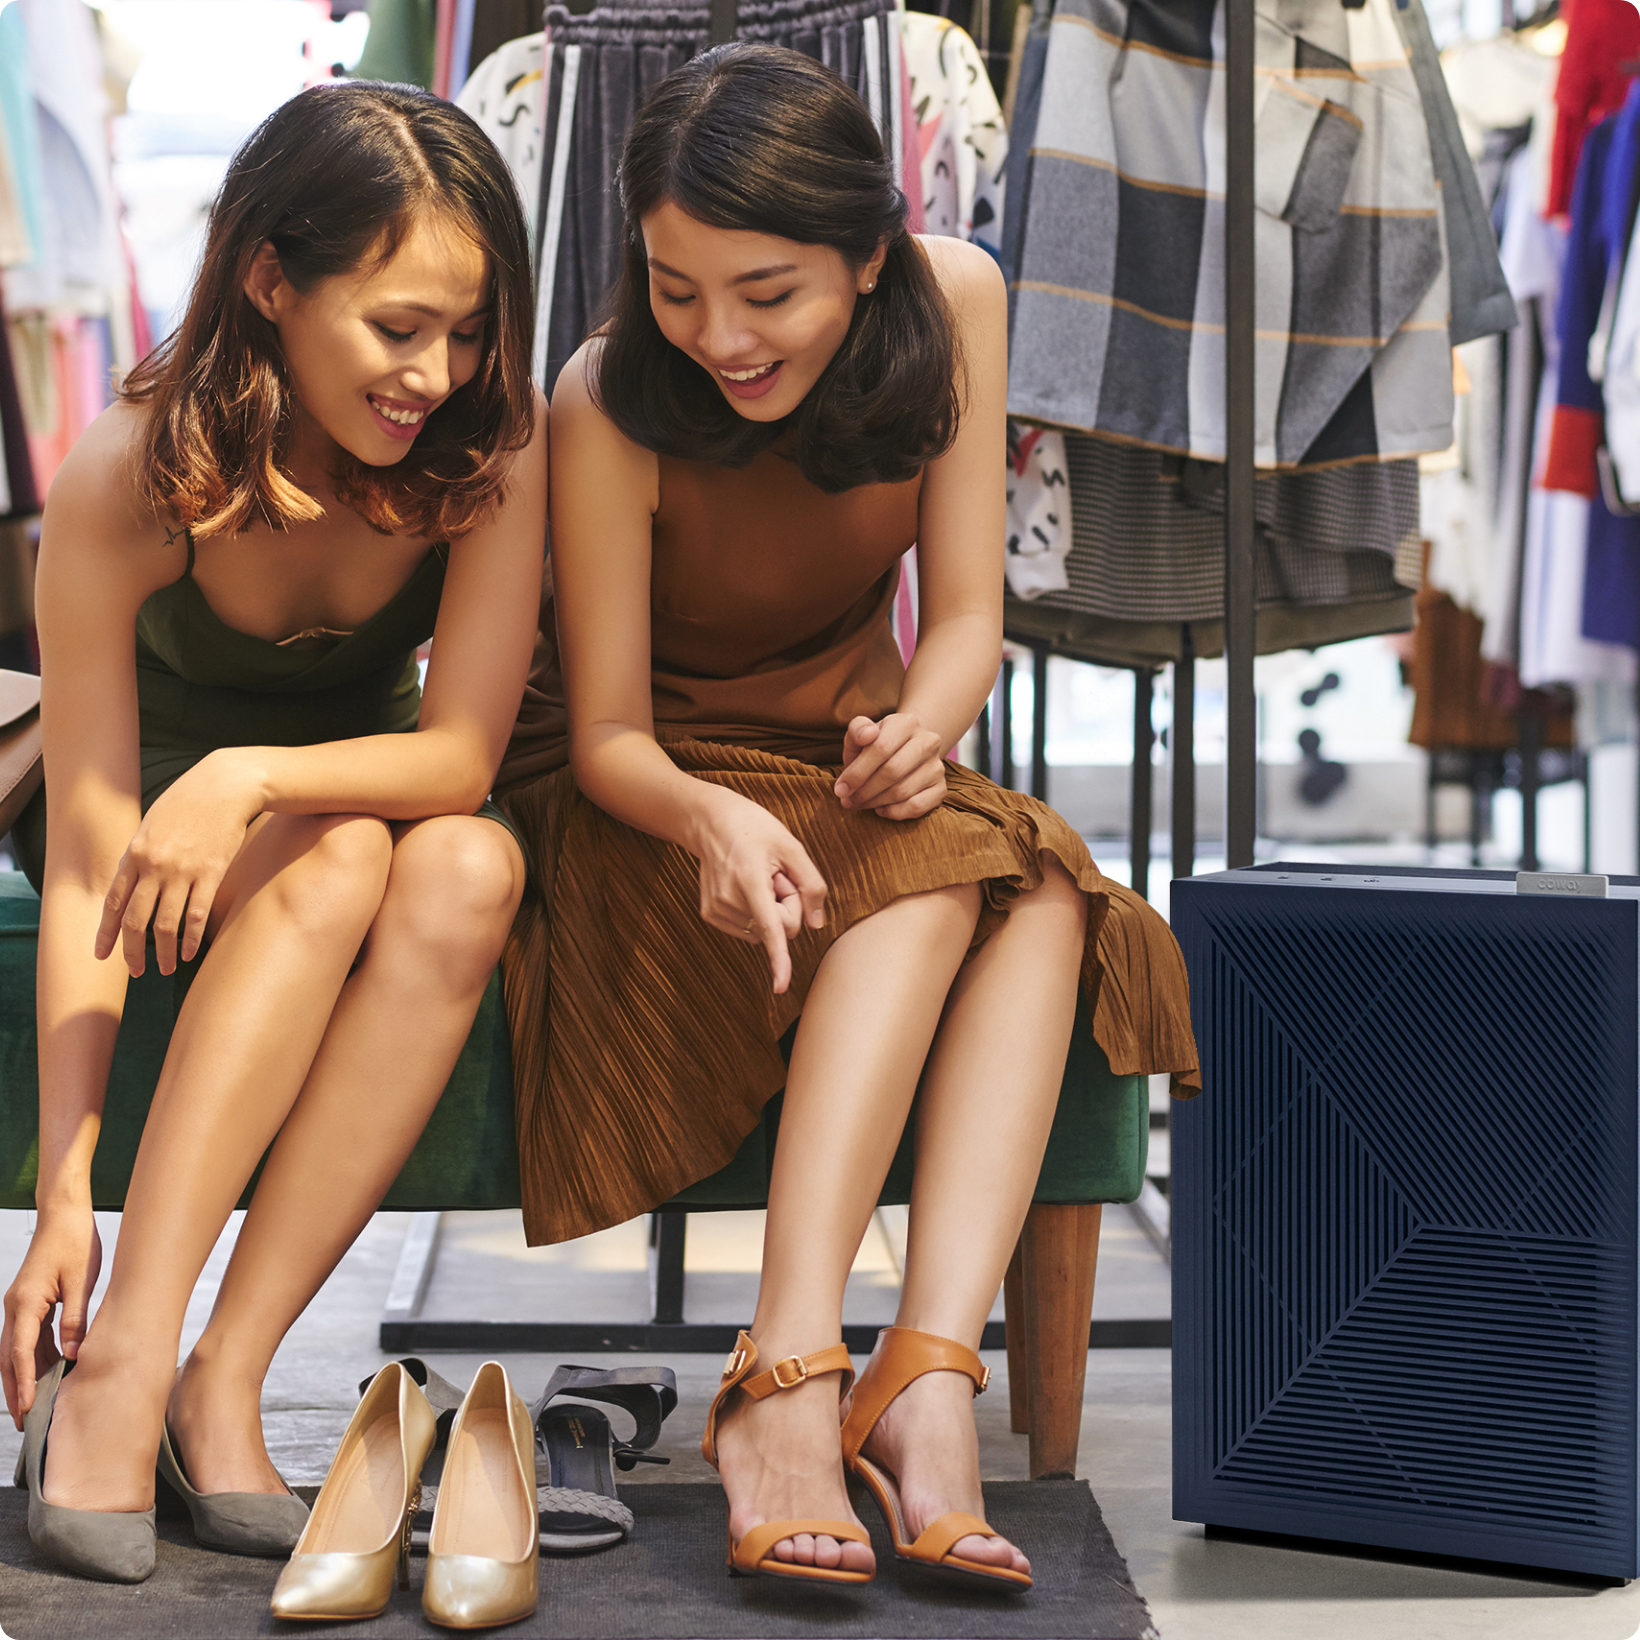 Women trying on shoes in a retail store with Airmega air purifier